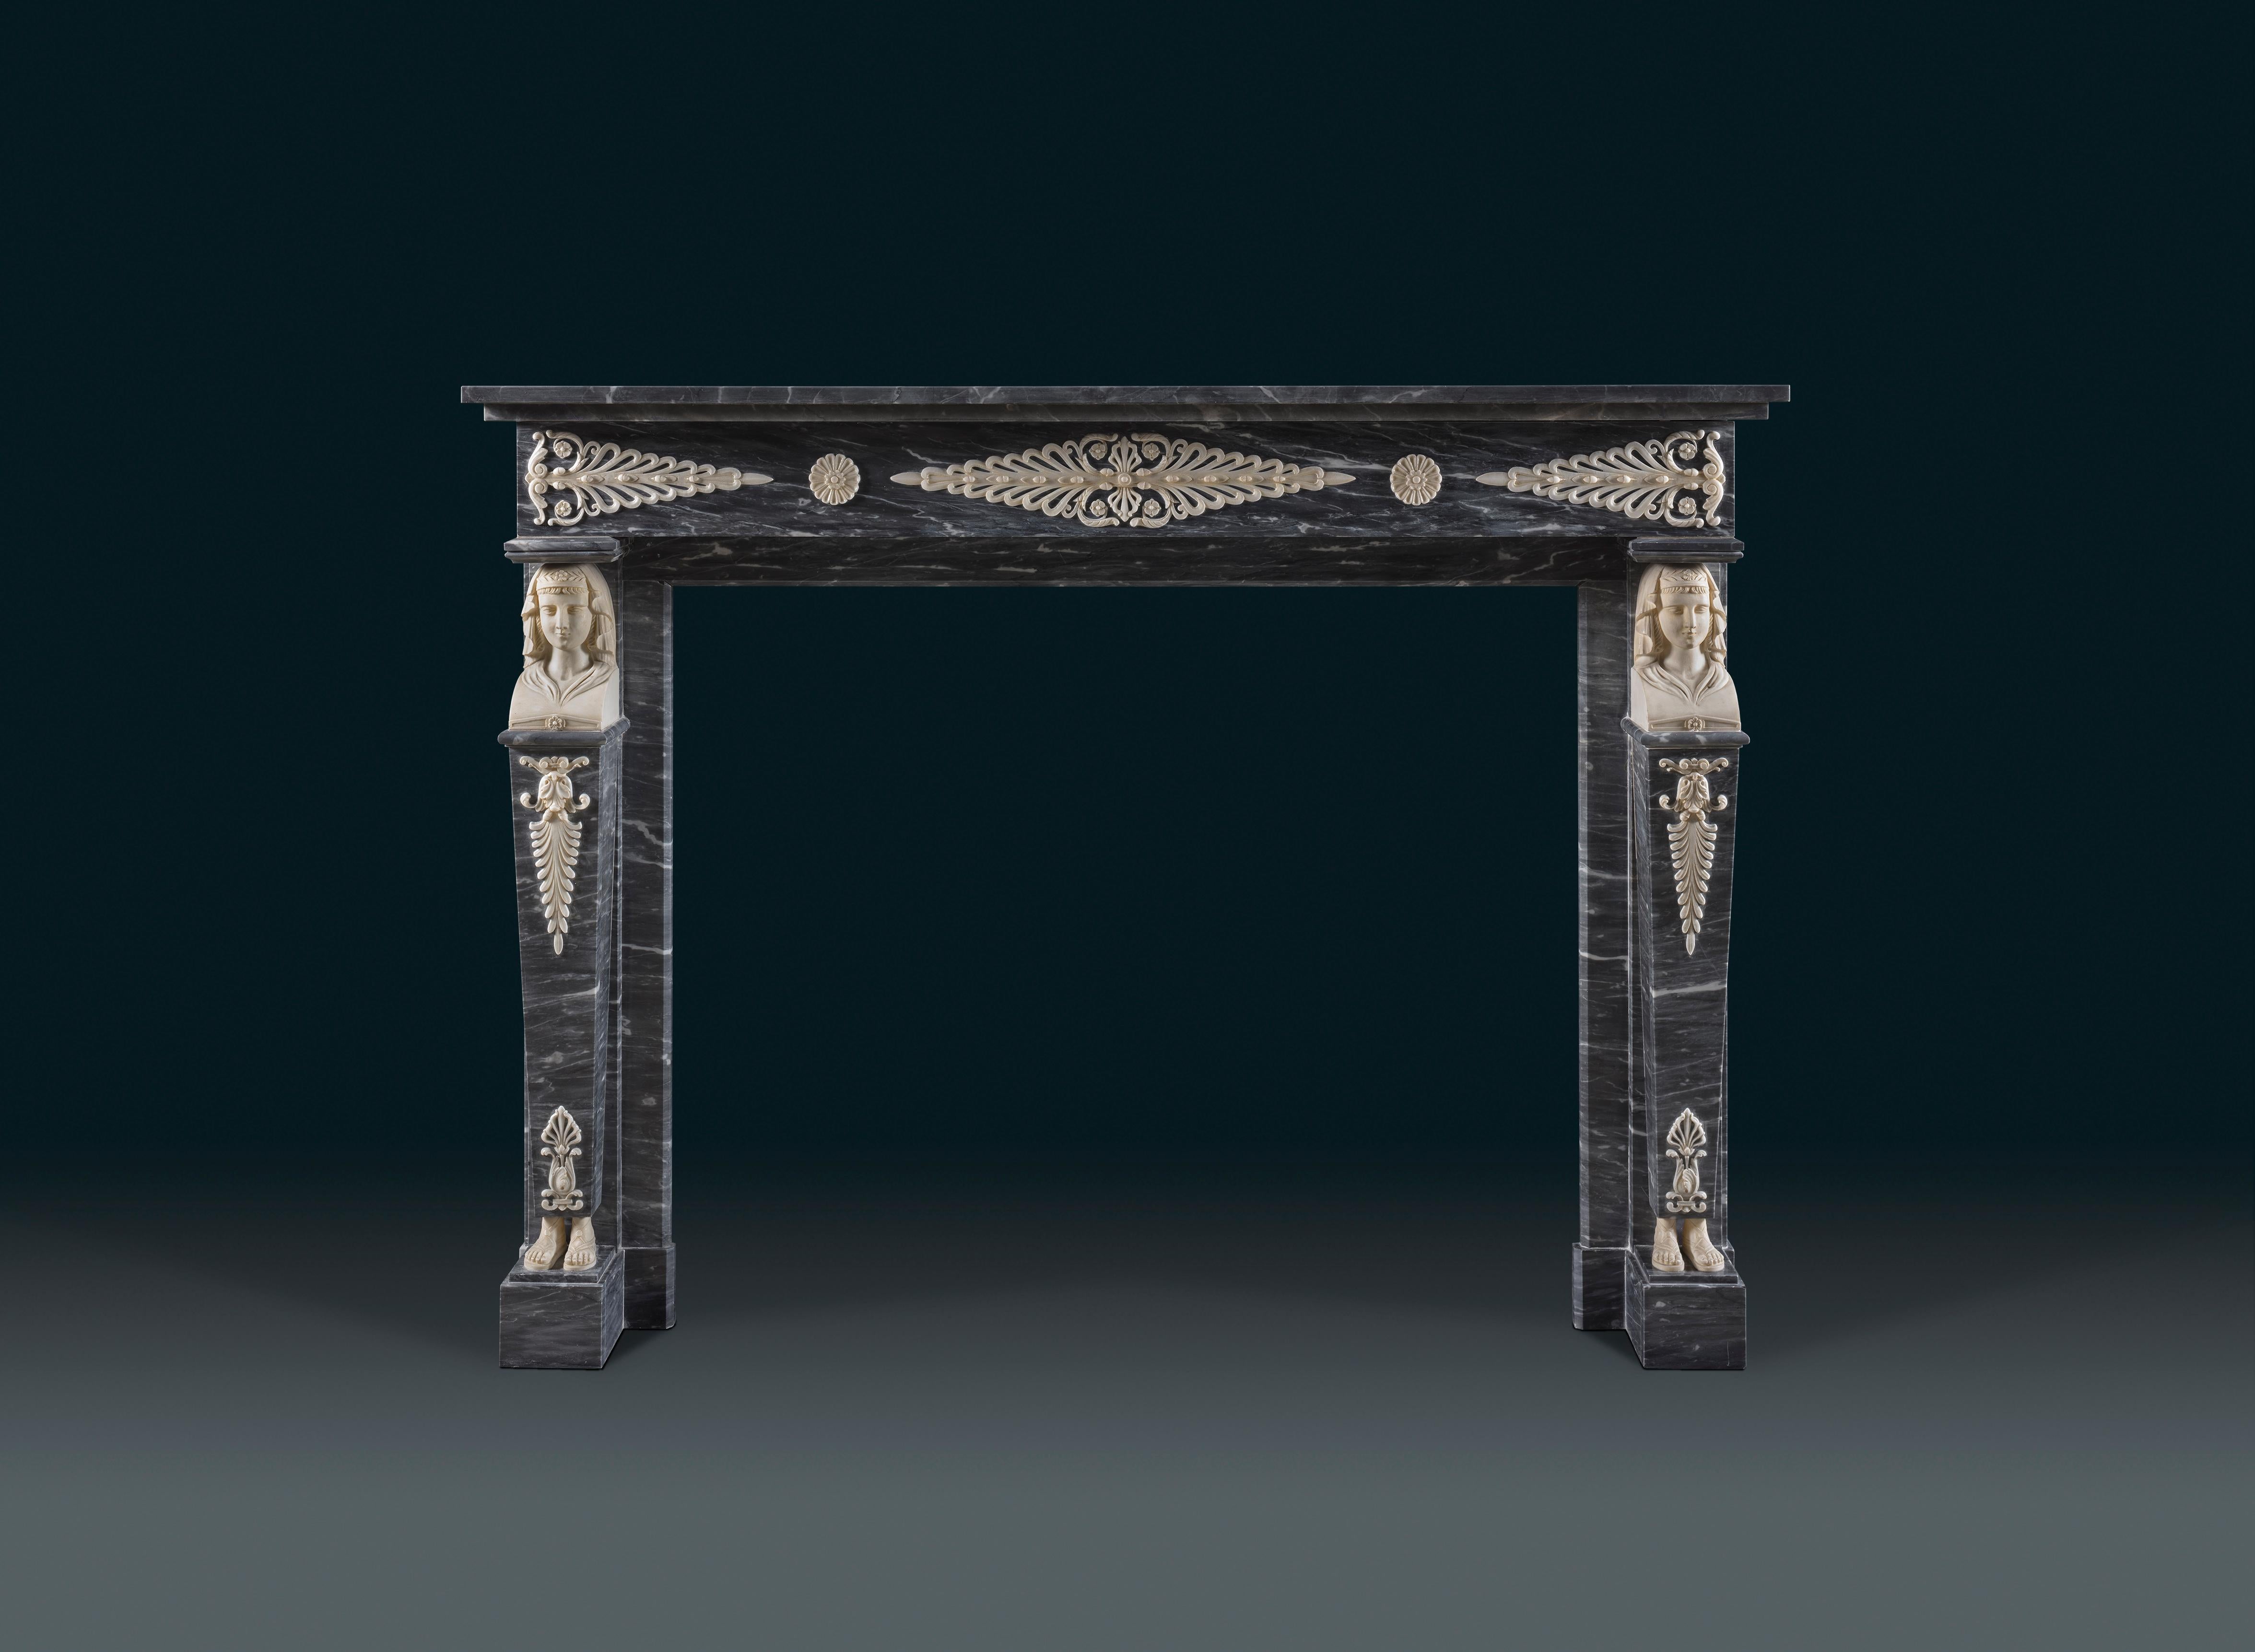 A French 1820’s chimneypiece carved in Bardiglio and statuary marble.
An early 19th century French fireplace in the Egyptian revival style, the simple rectangular shelf surmounts a frieze with palmettes and rosette paterae carved in white marble.